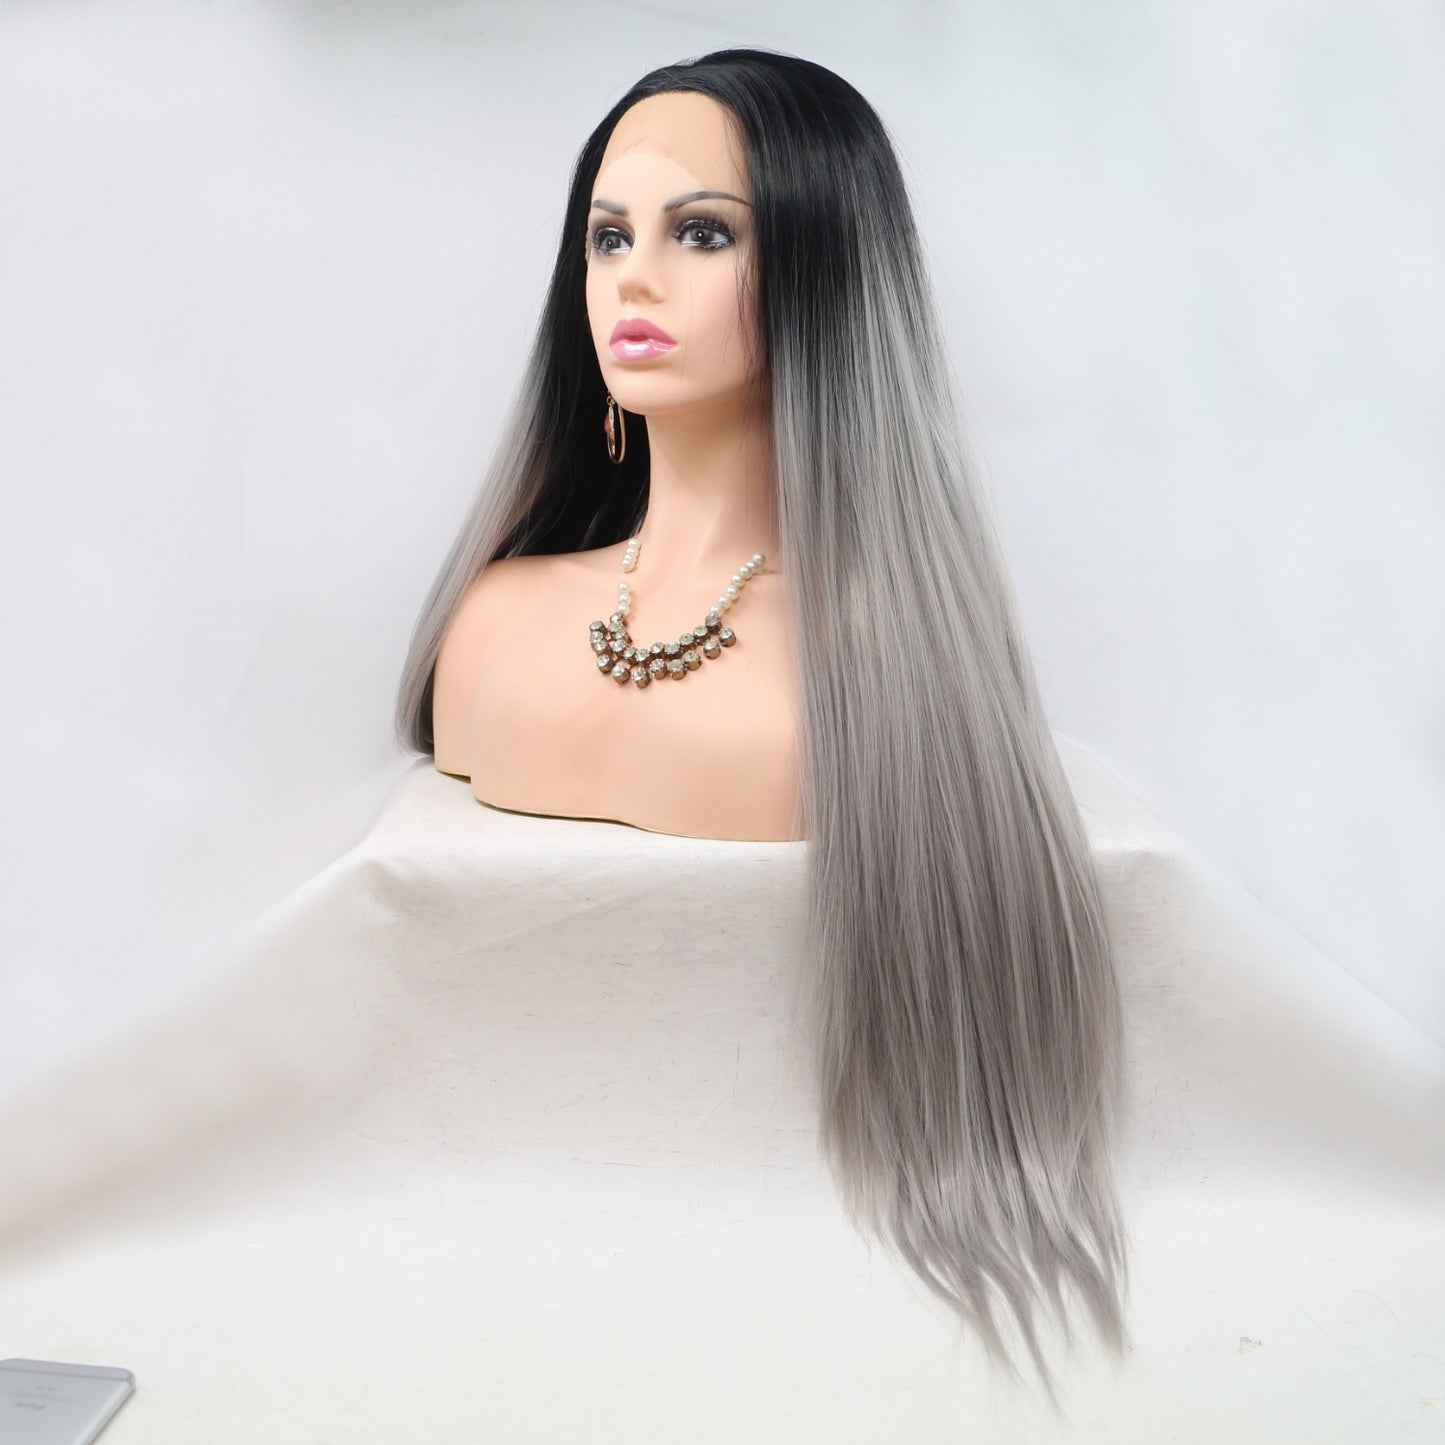 Rita 13*3" Lace Front Wigs Synthetic Long Straight 24" 130% Density